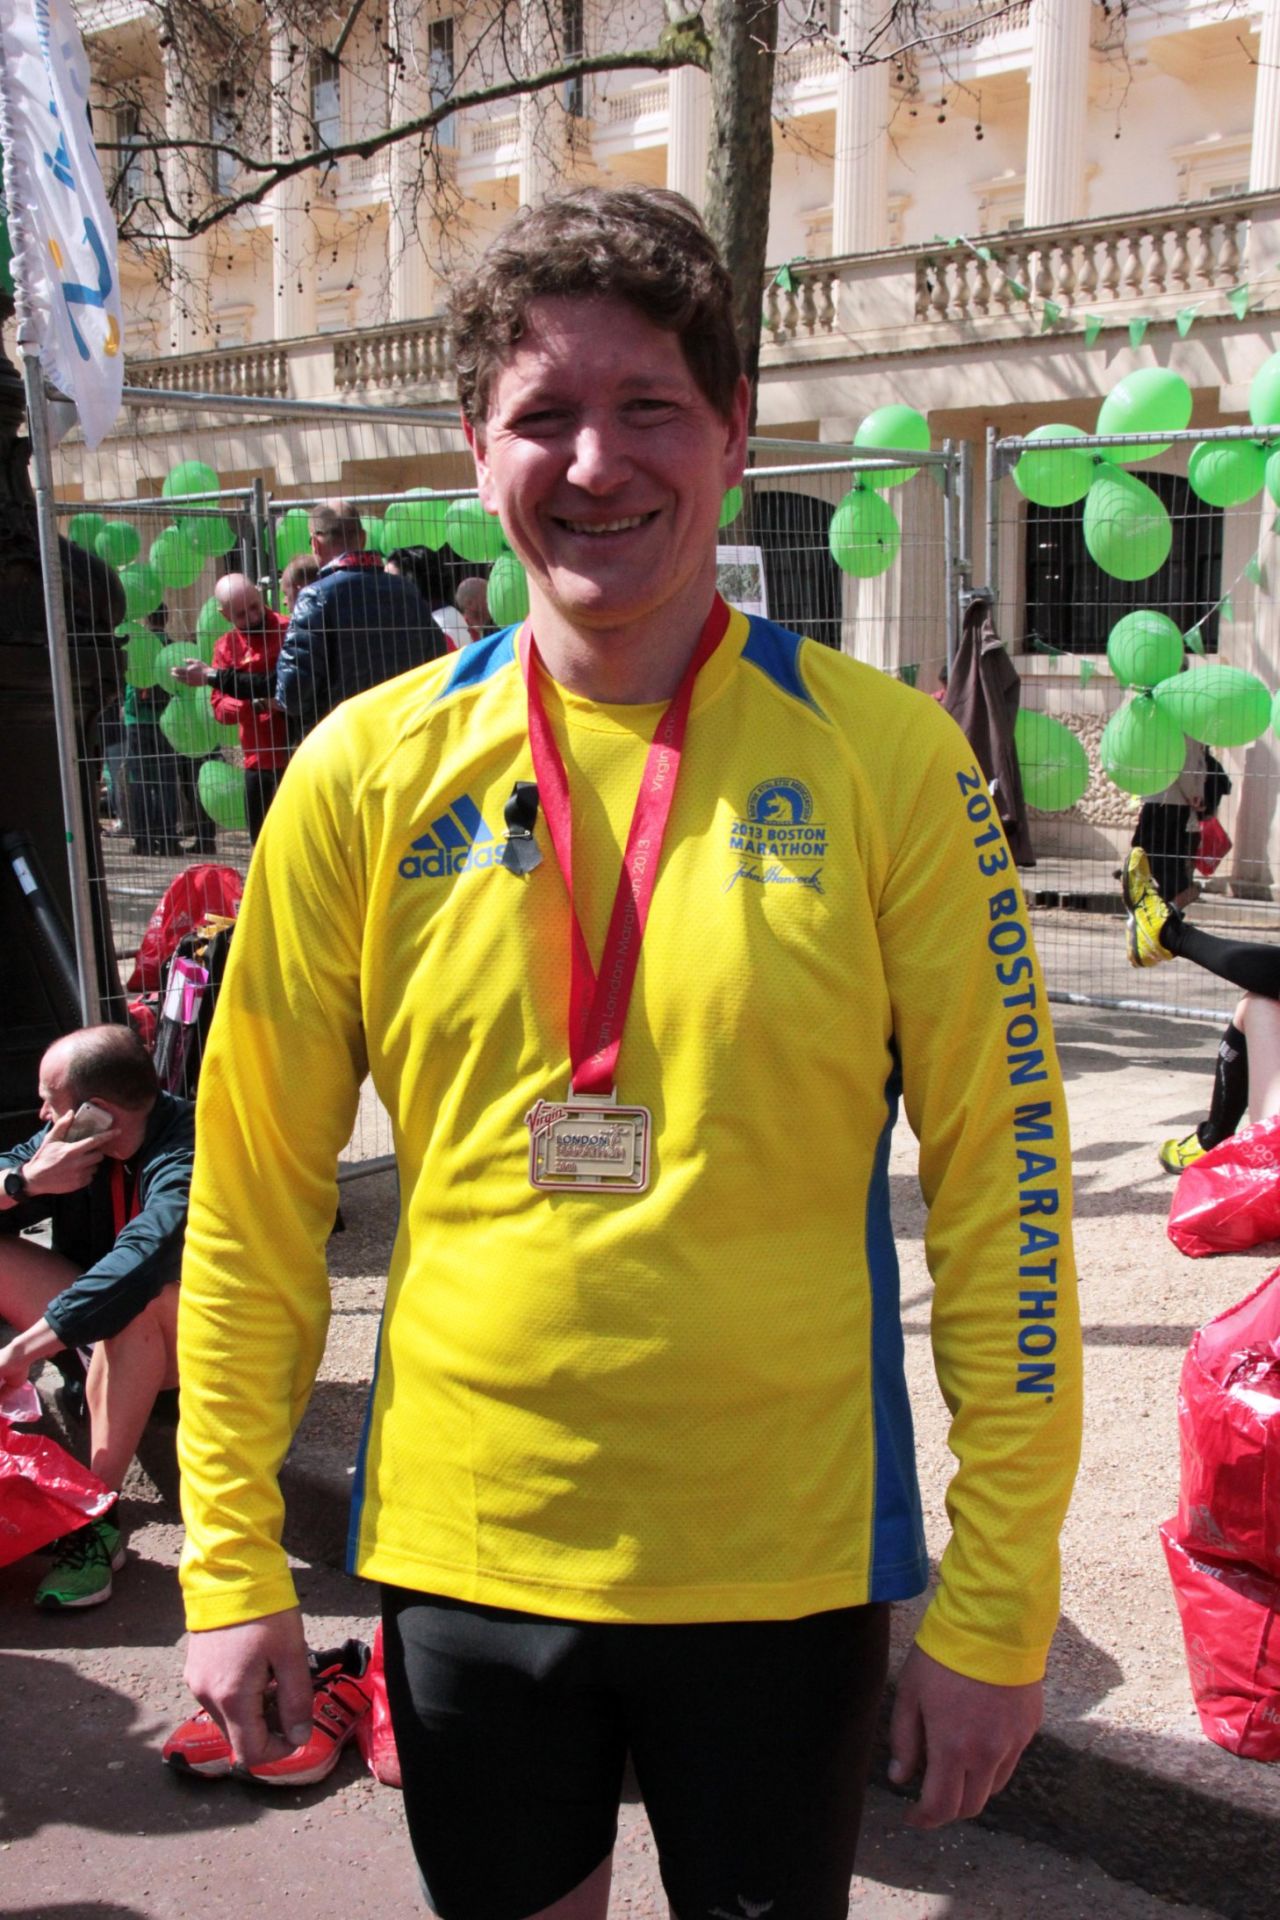 Several marathon runners also competed in the Boston Marathon Monday and wore their shirts in London.